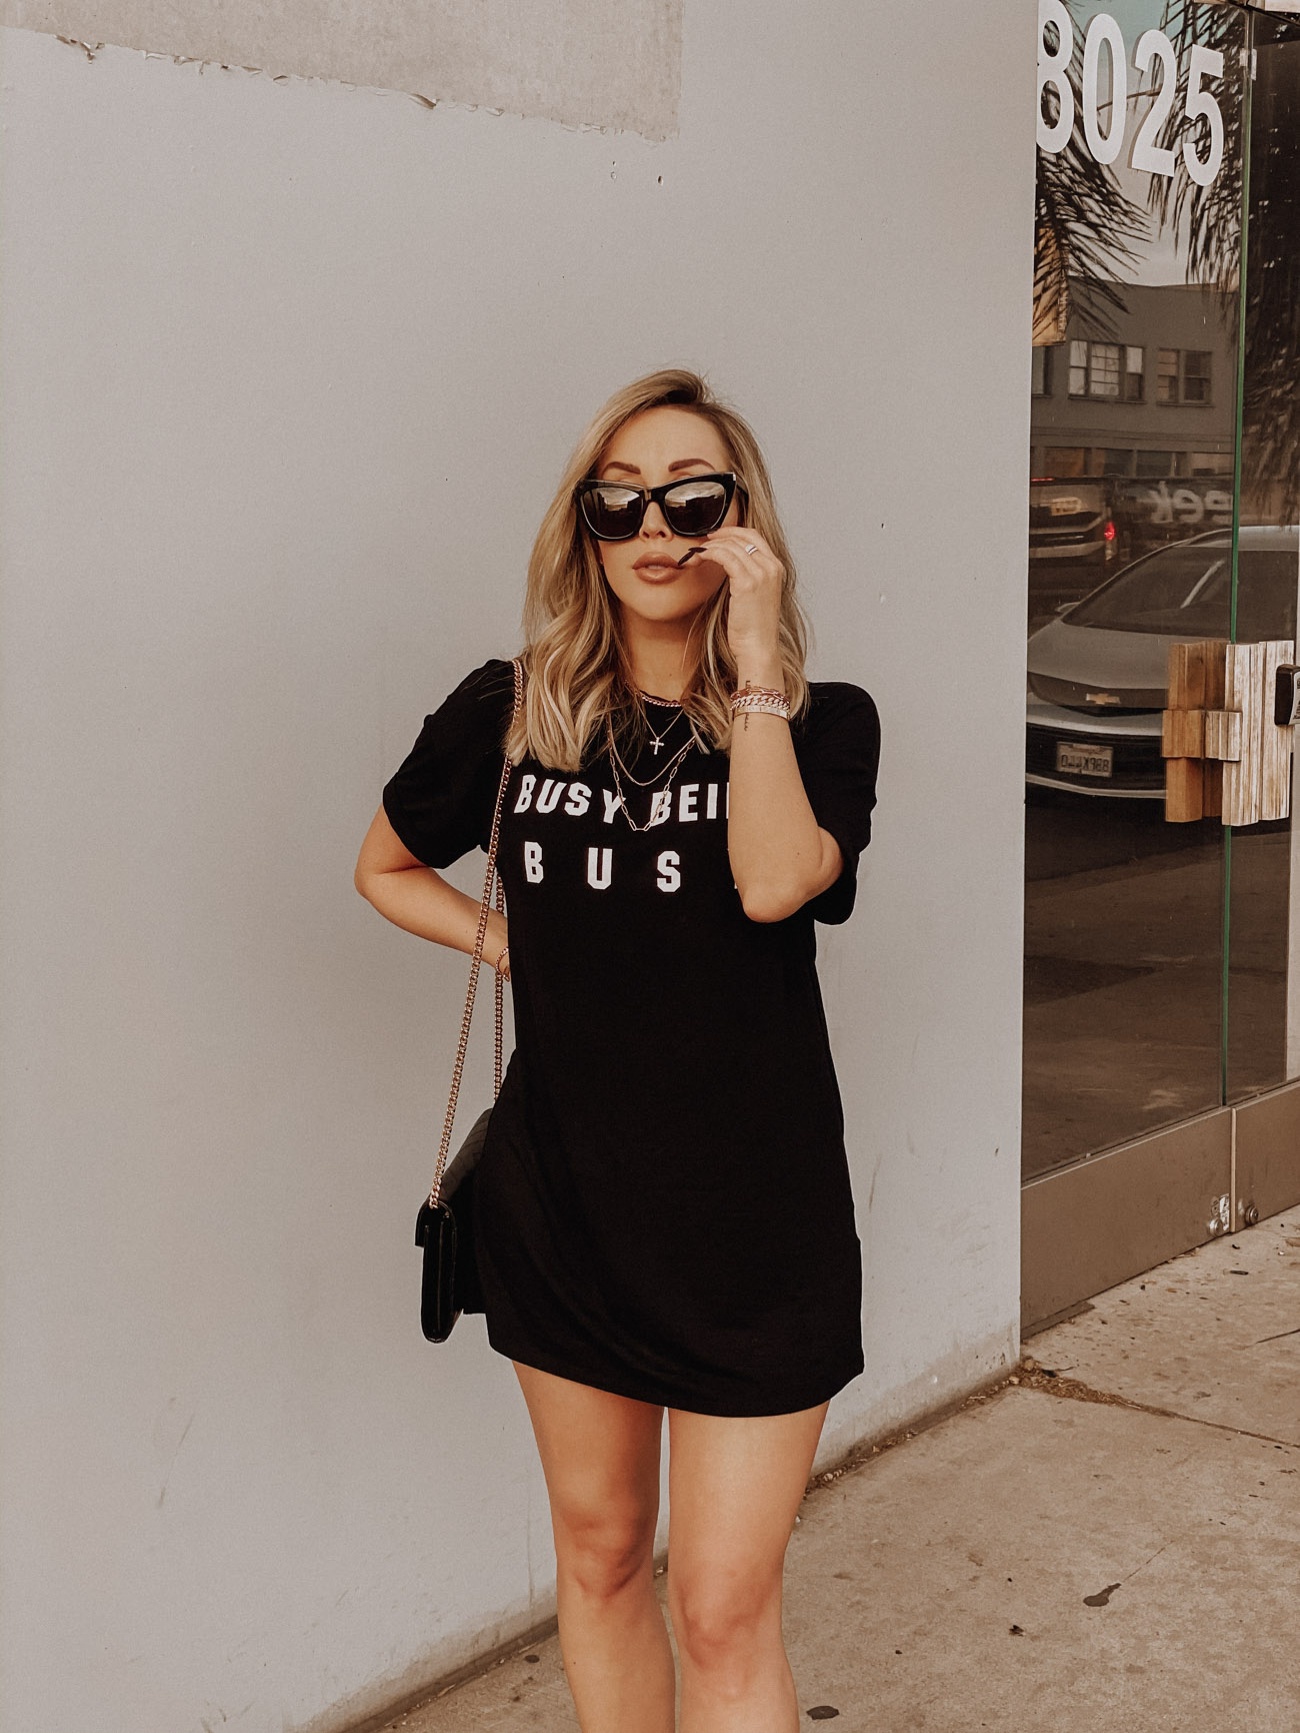 Busy Being Busy | Revolve | T-shirt Dress | Faux Snake Skin Boots | YSL sunglasses | LA Street Style | Blondie in the City by Hayley Larue